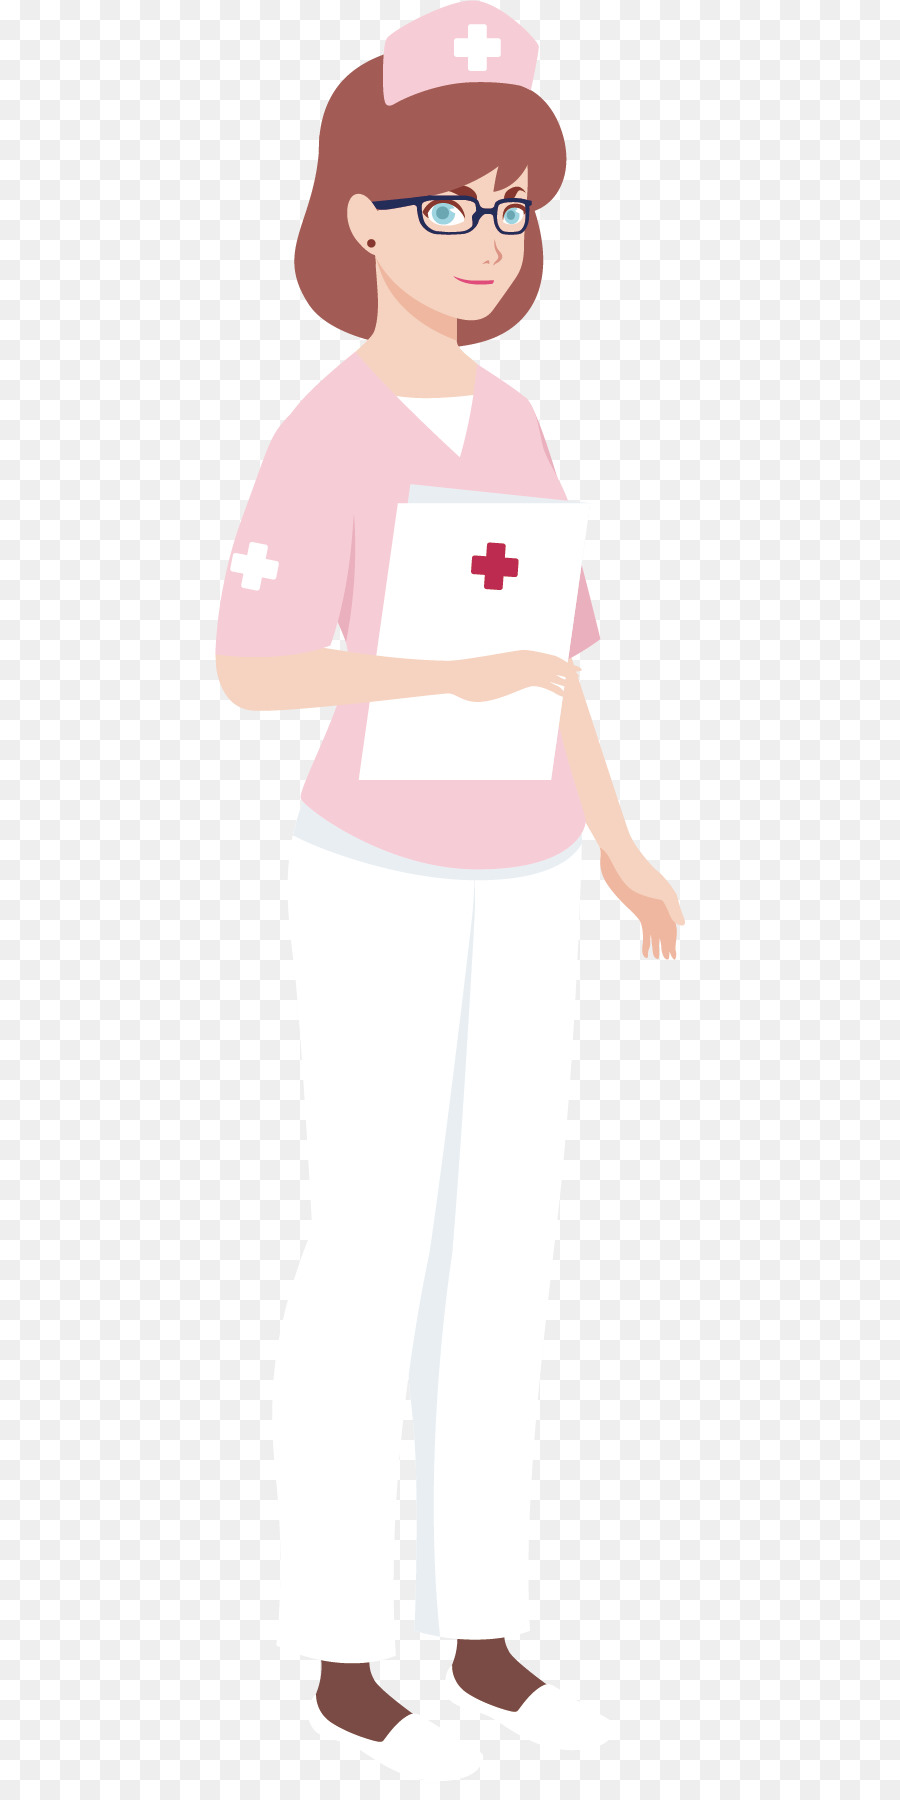 Cartoon Clip art - Pretty woman doctor png download - 470*1781 - Free Transparent  png Download.